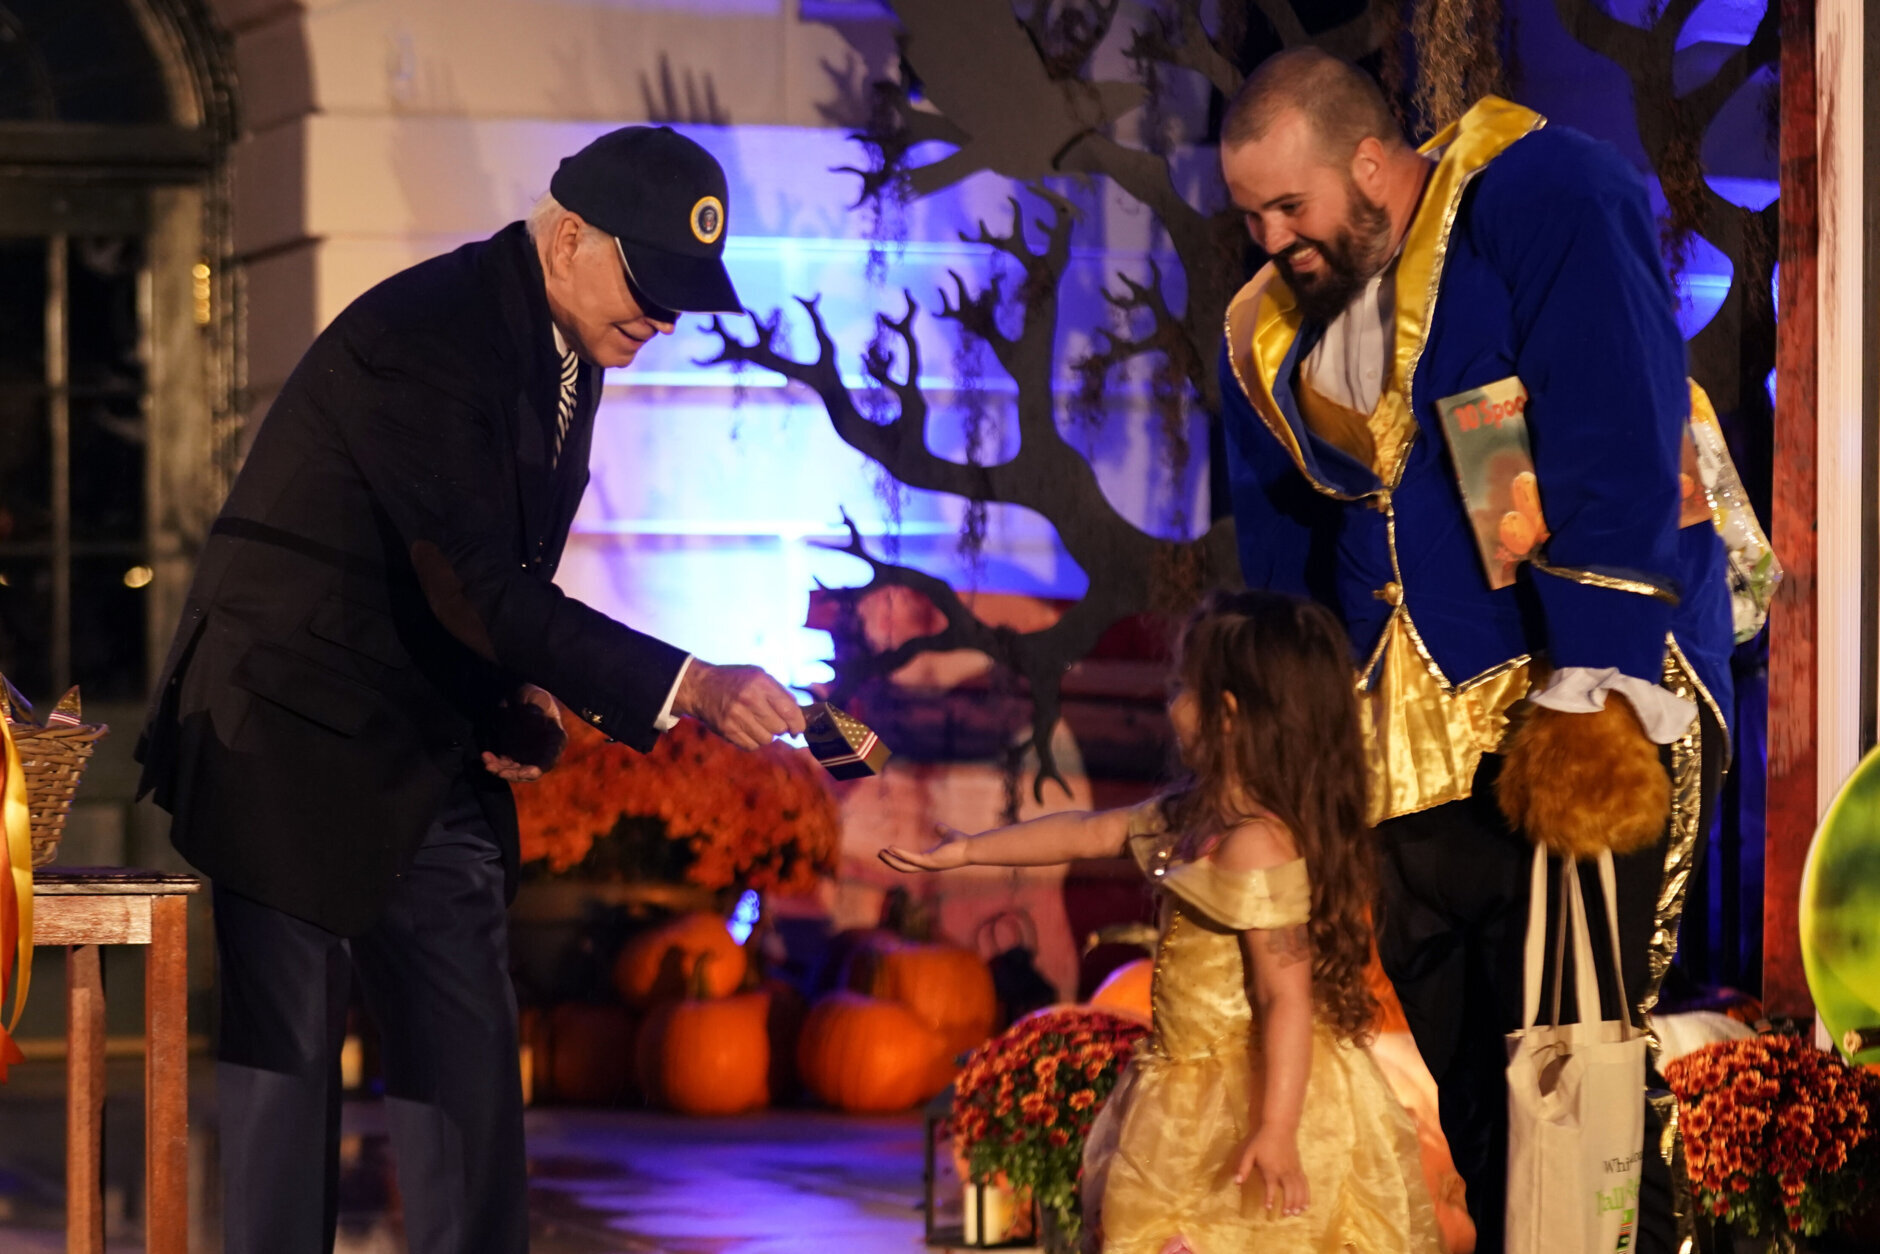 A family dressed as characters from Beauty and the Beast are greeted by Joe Biden